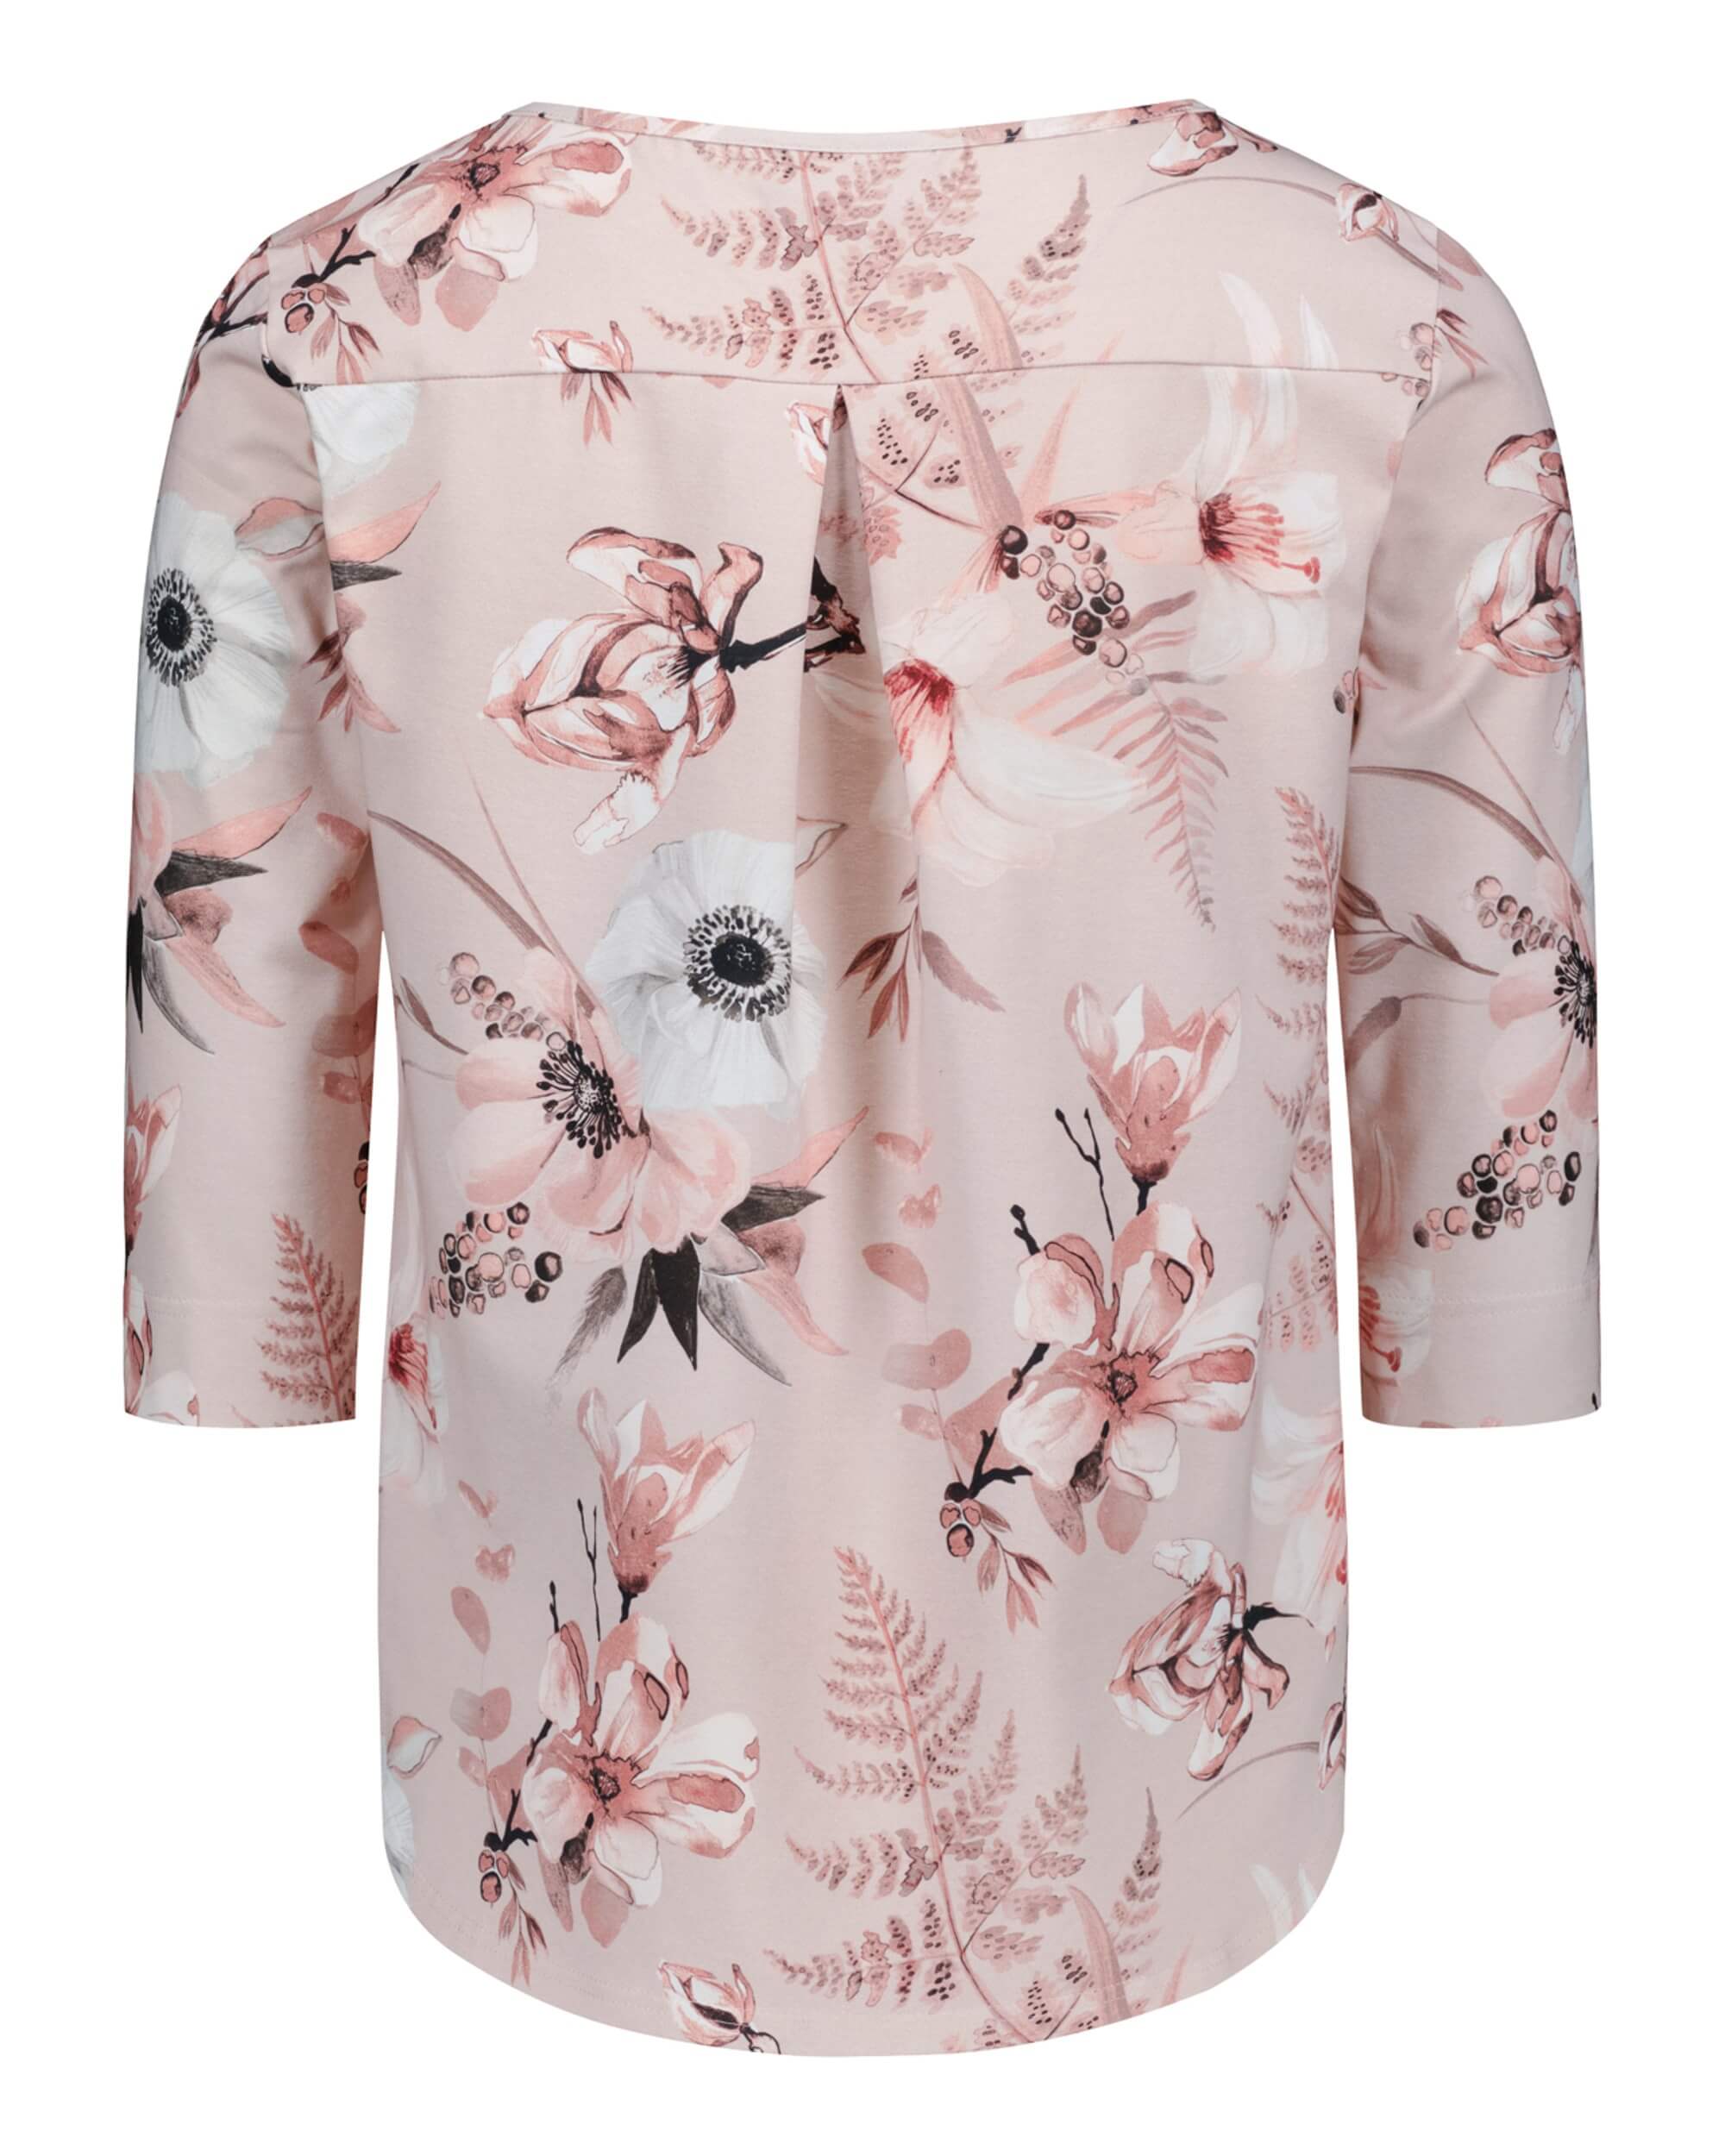 Classic Blouse, Rose Lily 